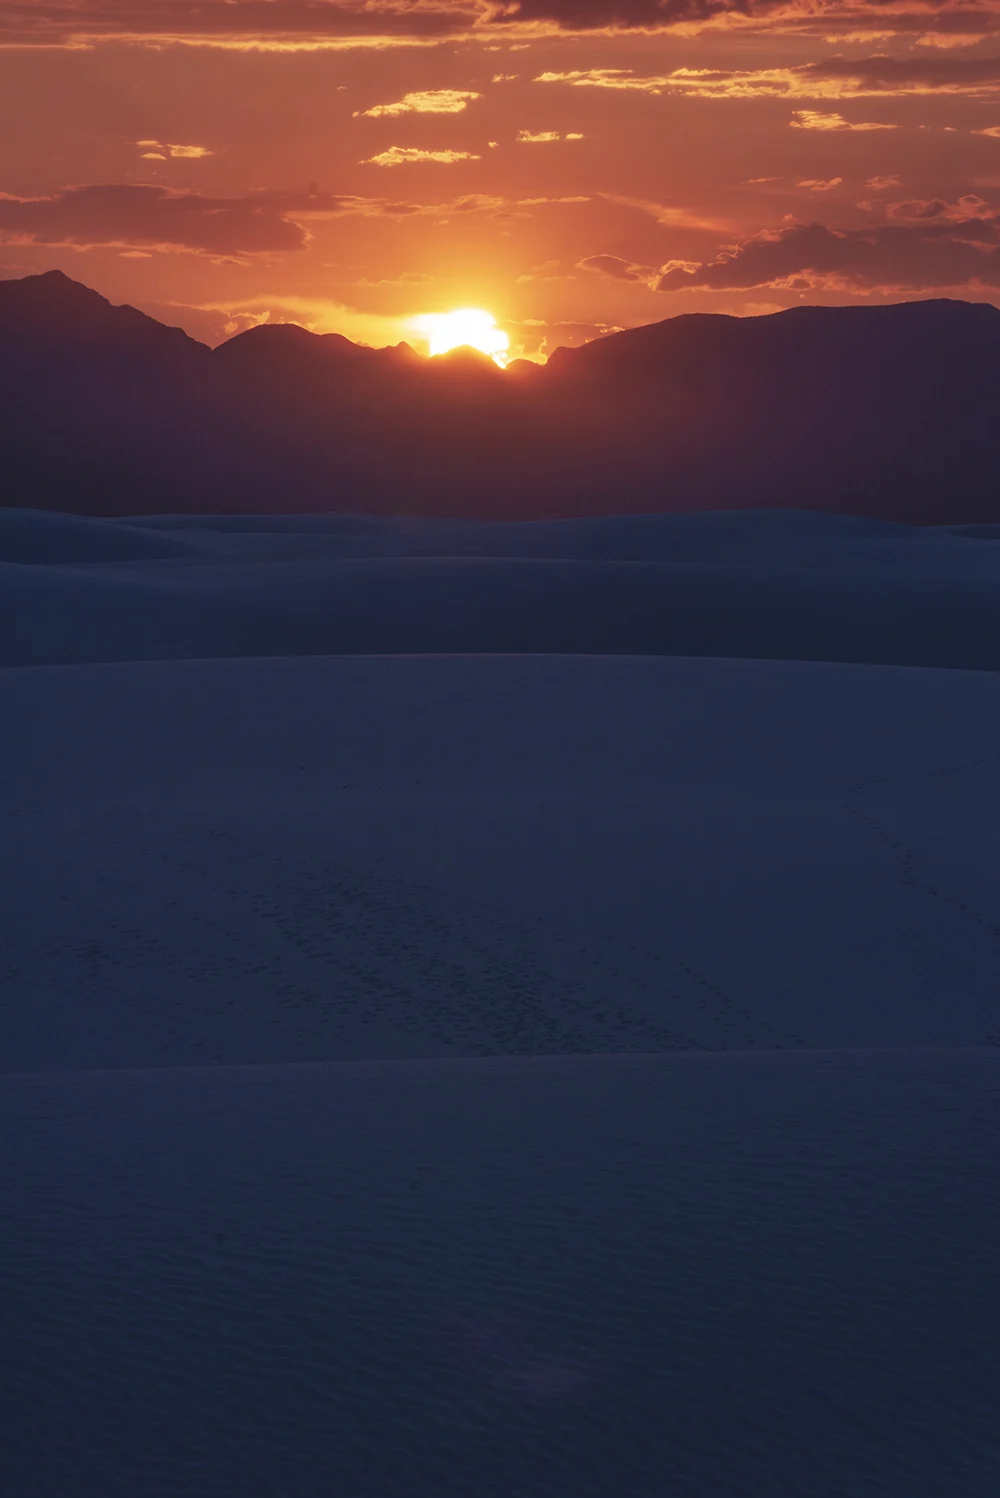 Sunset over White Sands National Park. Henry Herrera remembers of the Trinity test, when “the night turned to day, like heaven came down.”